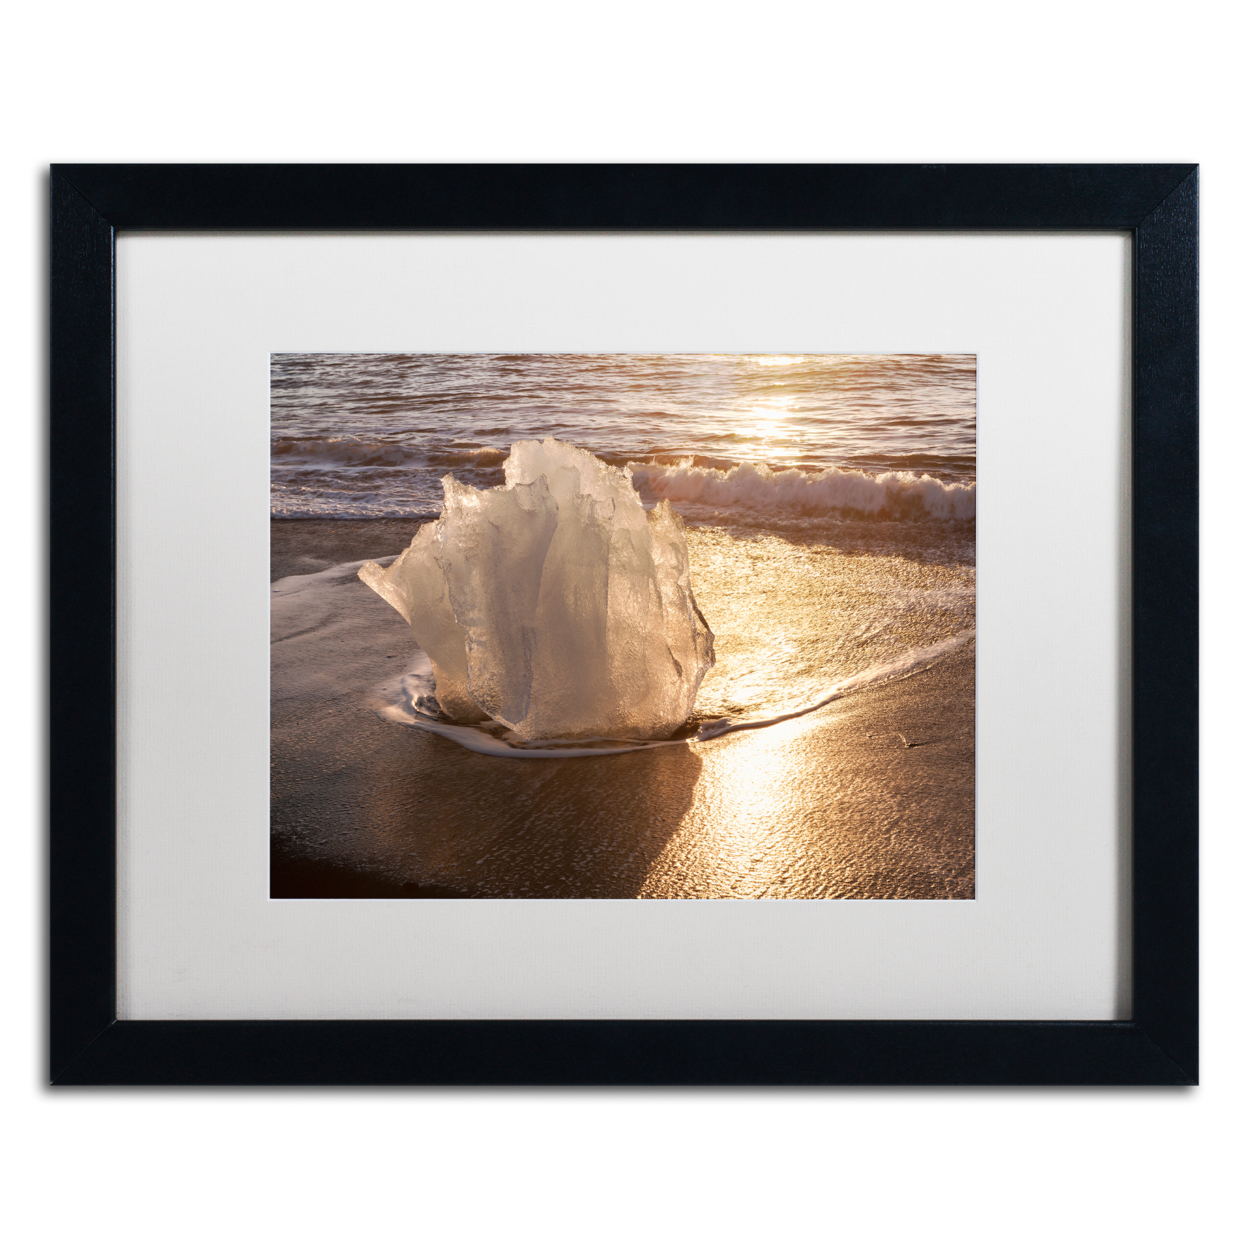 Michael Blanchette Photography 'Ice Tulip' Black Wooden Framed Art 18 X 22 Inches